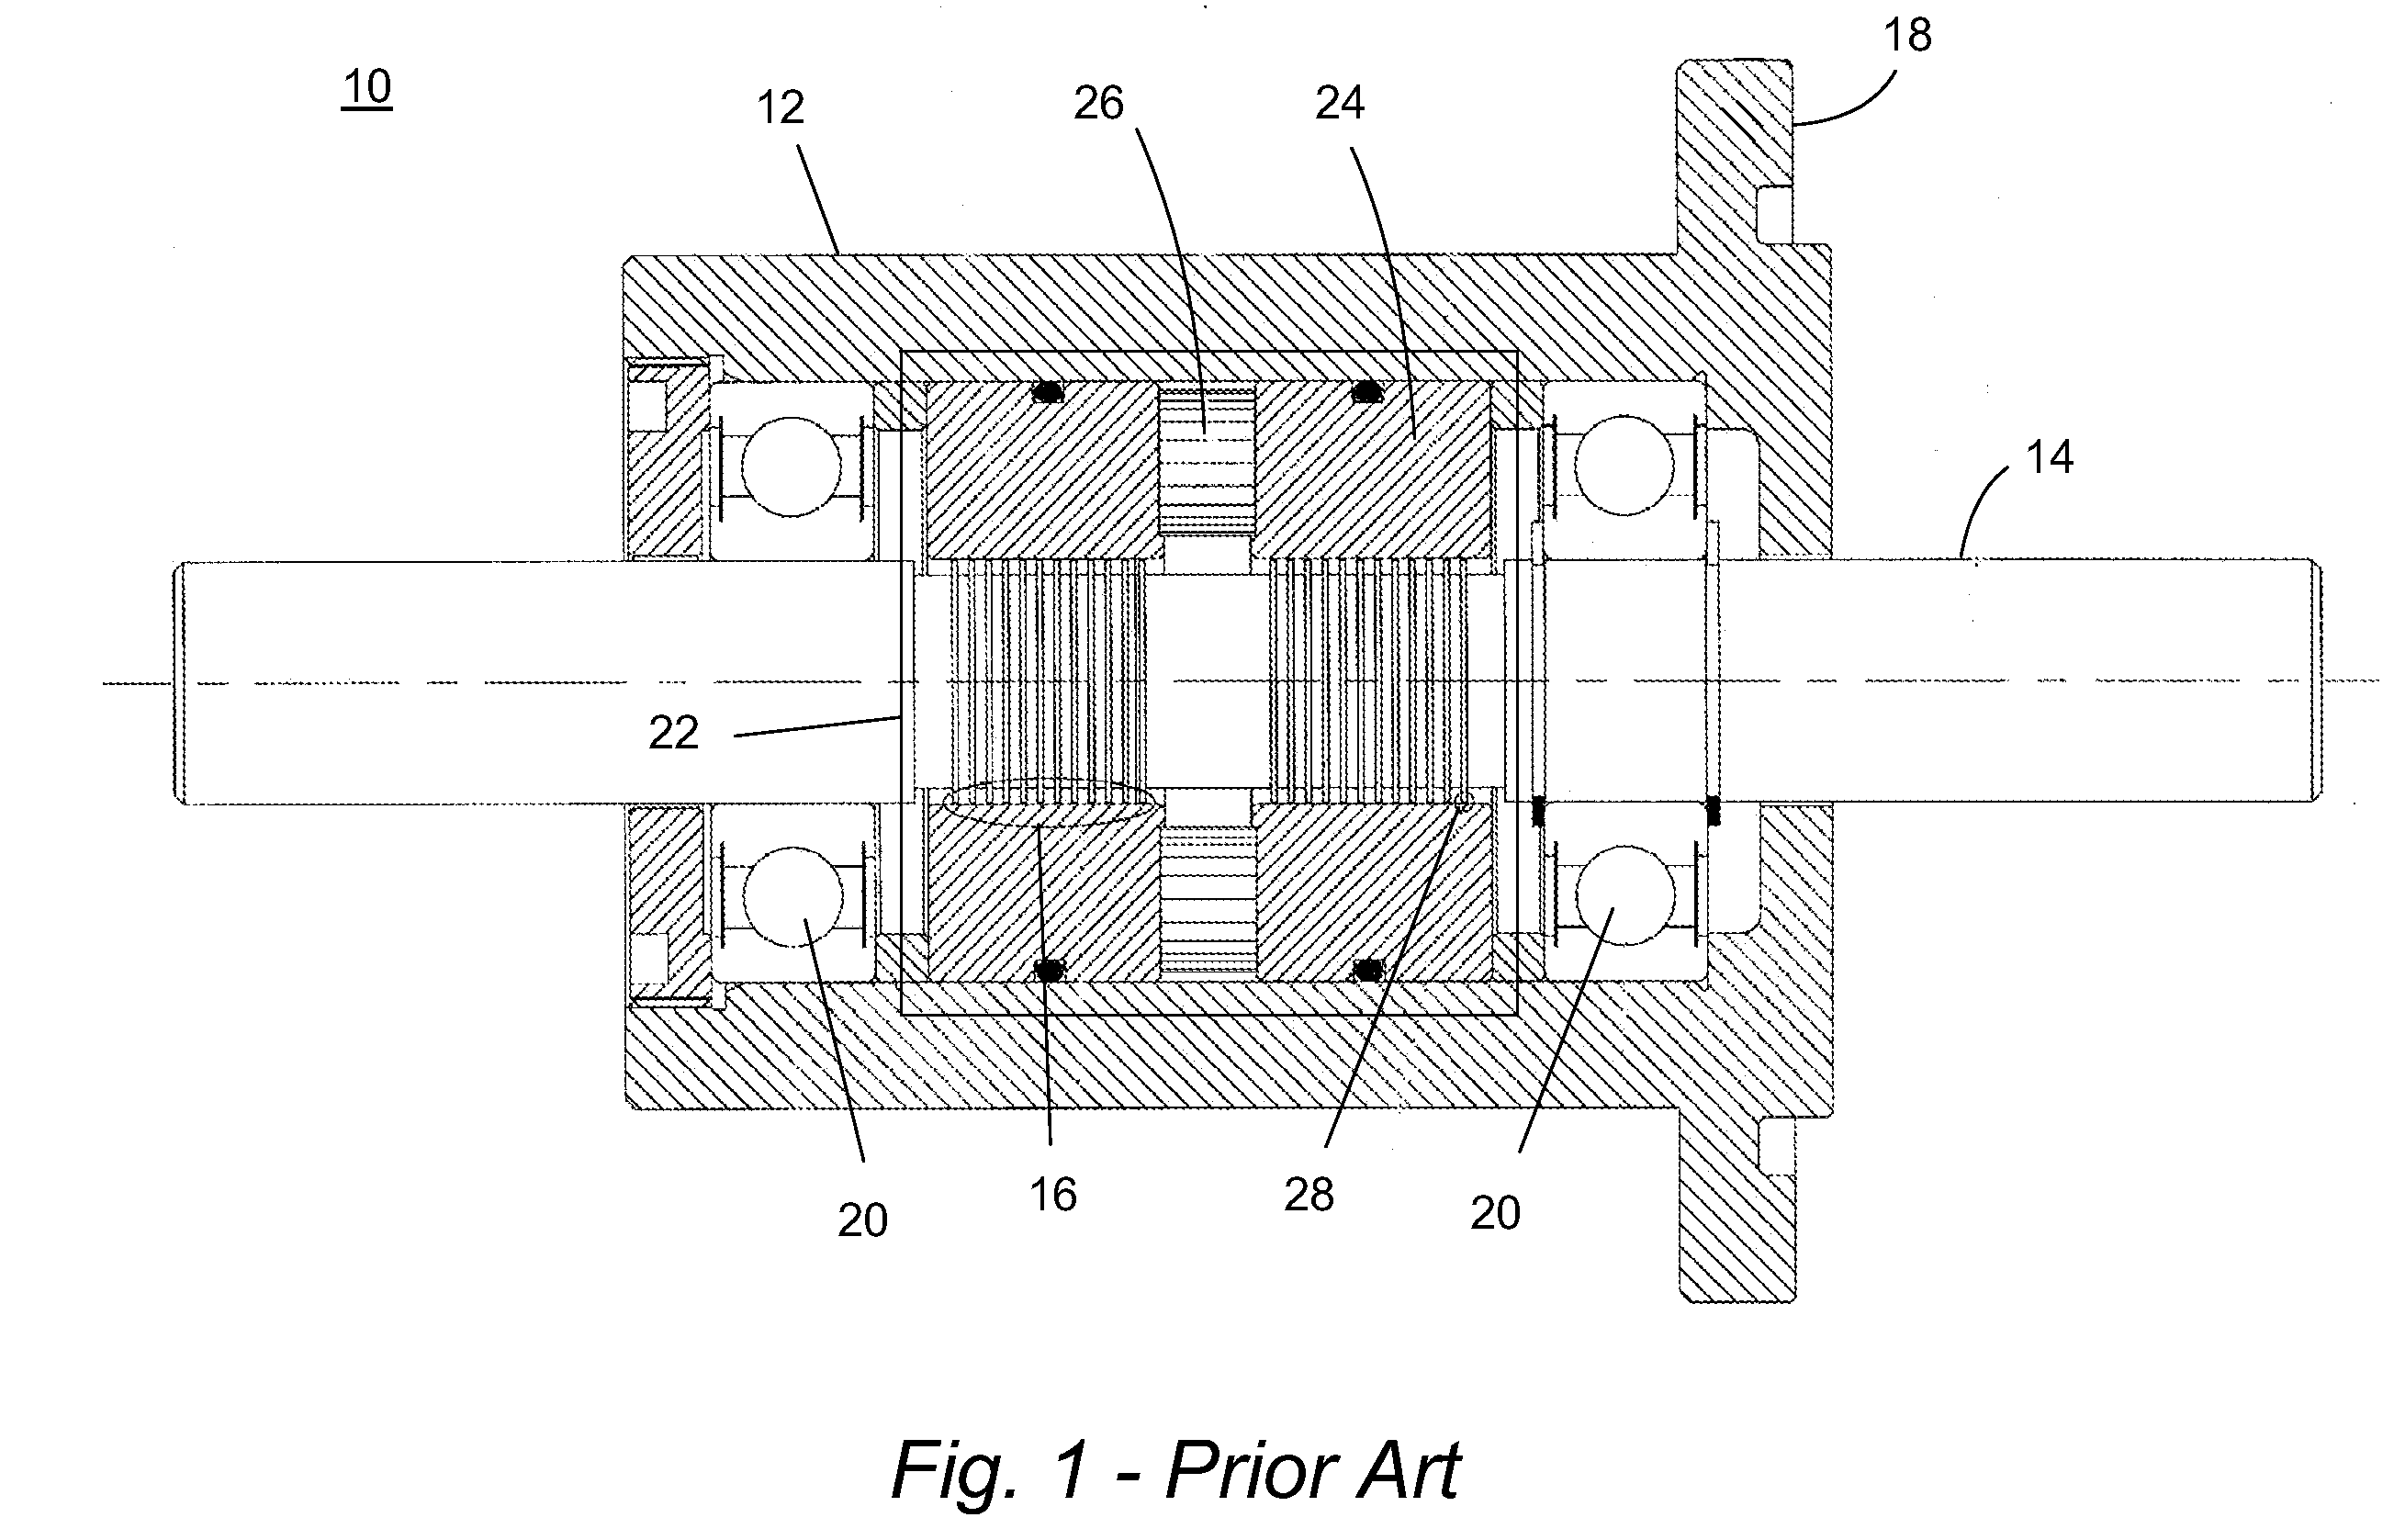 Magnetic fluid rotary feedthrough with sensing and communication capability